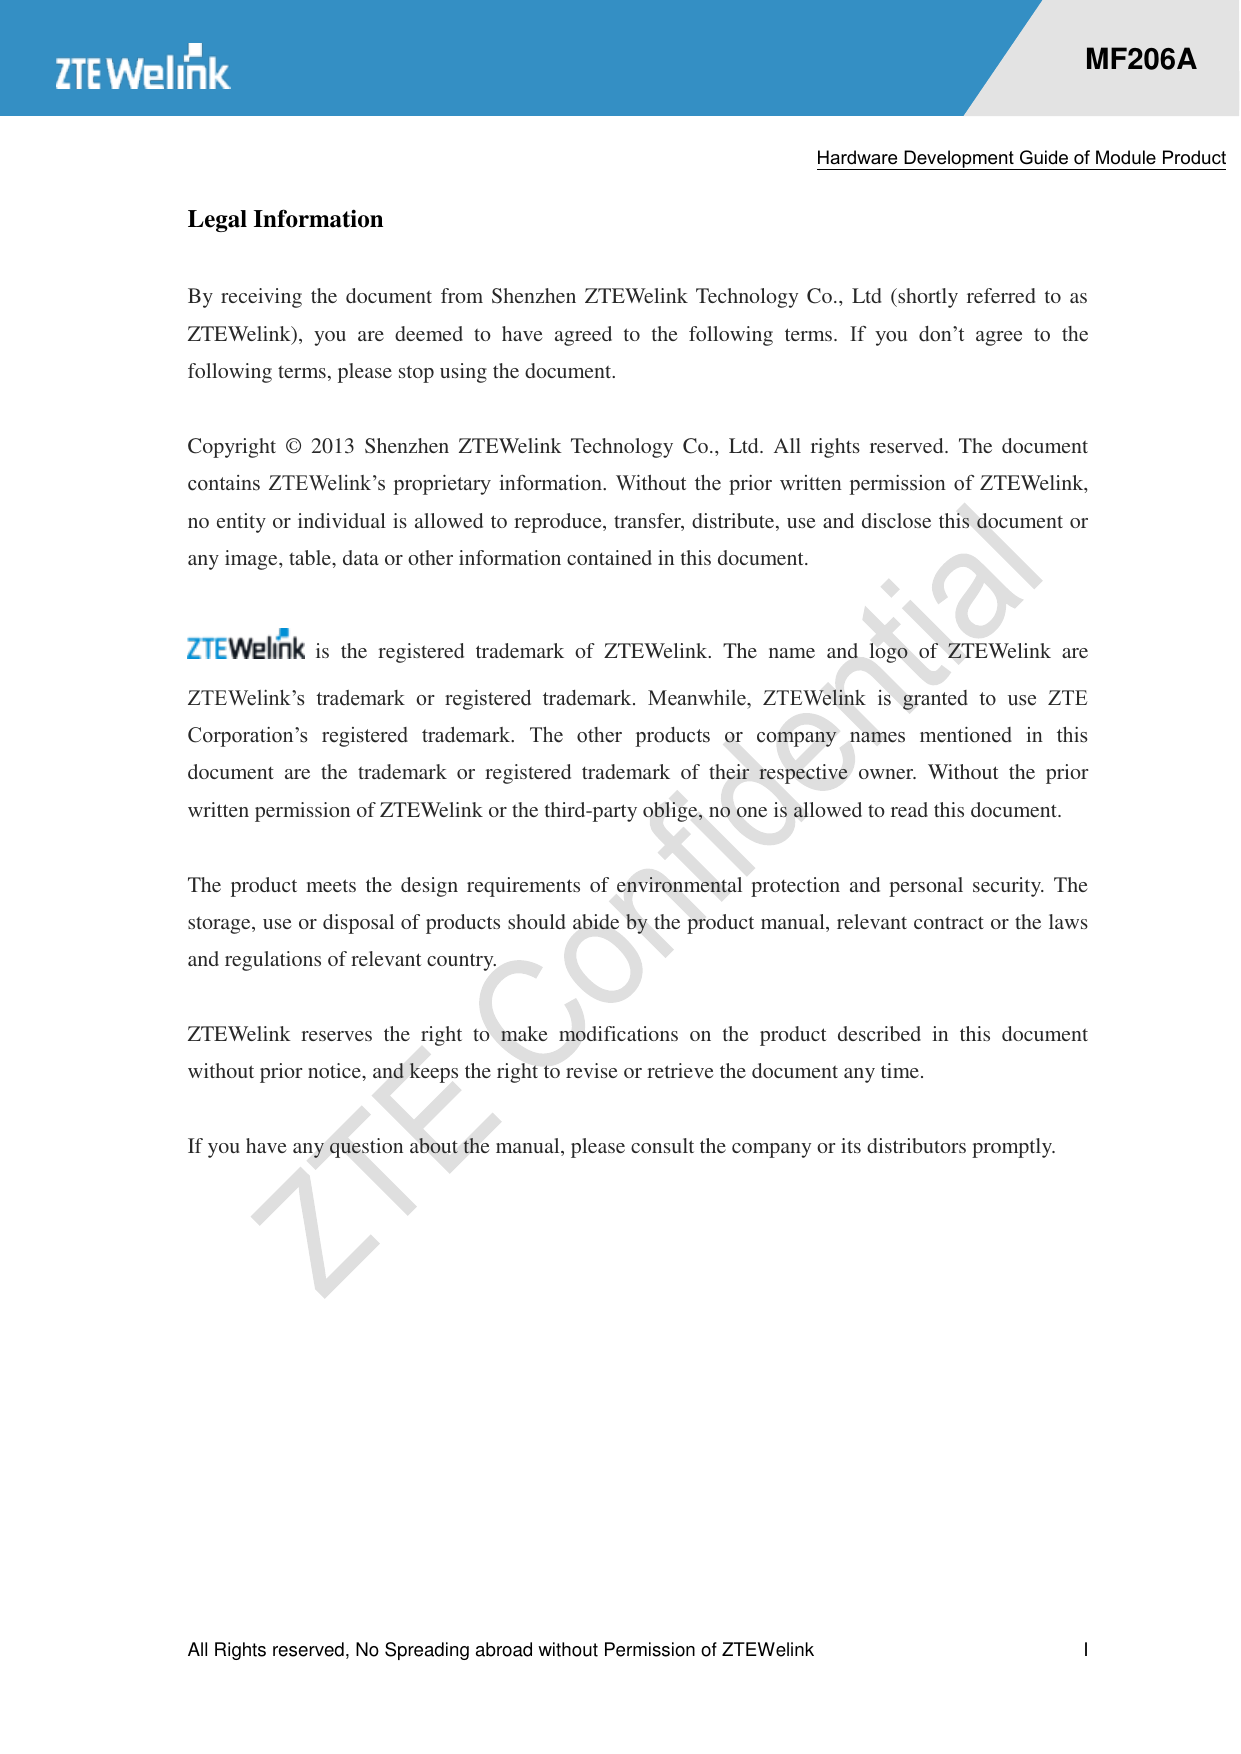  Hardware Development Guide of Module Product  All Rights reserved, No Spreading abroad without Permission of ZTEWelink              I    MF206A Legal Information  By receiving the document from Shenzhen ZTEWelink Technology Co., Ltd (shortly referred to as ZTEWelink),  you  are  deemed  to  have  agreed  to  the  following  terms.  If  you  don’t  agree  to  the following terms, please stop using the document.  Copyright  ©  2013  Shenzhen ZTEWelink  Technology  Co.,  Ltd.  All  rights  reserved.  The  document contains ZTEWelink’s  proprietary  information. Without  the  prior written permission of  ZTEWelink, no entity or individual is allowed to reproduce, transfer, distribute, use and disclose this document or any image, table, data or other information contained in this document.    is  the  registered  trademark  of  ZTEWelink.  The  name  and  logo  of  ZTEWelink  are ZTEWelink’s  trademark  or  registered  trademark.  Meanwhile,  ZTEWelink  is  granted  to  use  ZTE Corporation’s  registered  trademark.  The  other  products  or  company  names  mentioned  in  this document  are  the  trademark  or  registered  trademark  of  their  respective  owner.  Without  the  prior written permission of ZTEWelink or the third-party oblige, no one is allowed to read this document.  The product meets the  design  requirements of environmental protection and  personal security.  The storage, use or disposal of products should abide by the product manual, relevant contract or the laws and regulations of relevant country.    ZTEWelink  reserves  the  right  to  make  modifications  on  the  product  described  in  this  document without prior notice, and keeps the right to revise or retrieve the document any time.    If you have any question about the manual, please consult the company or its distributors promptly. 